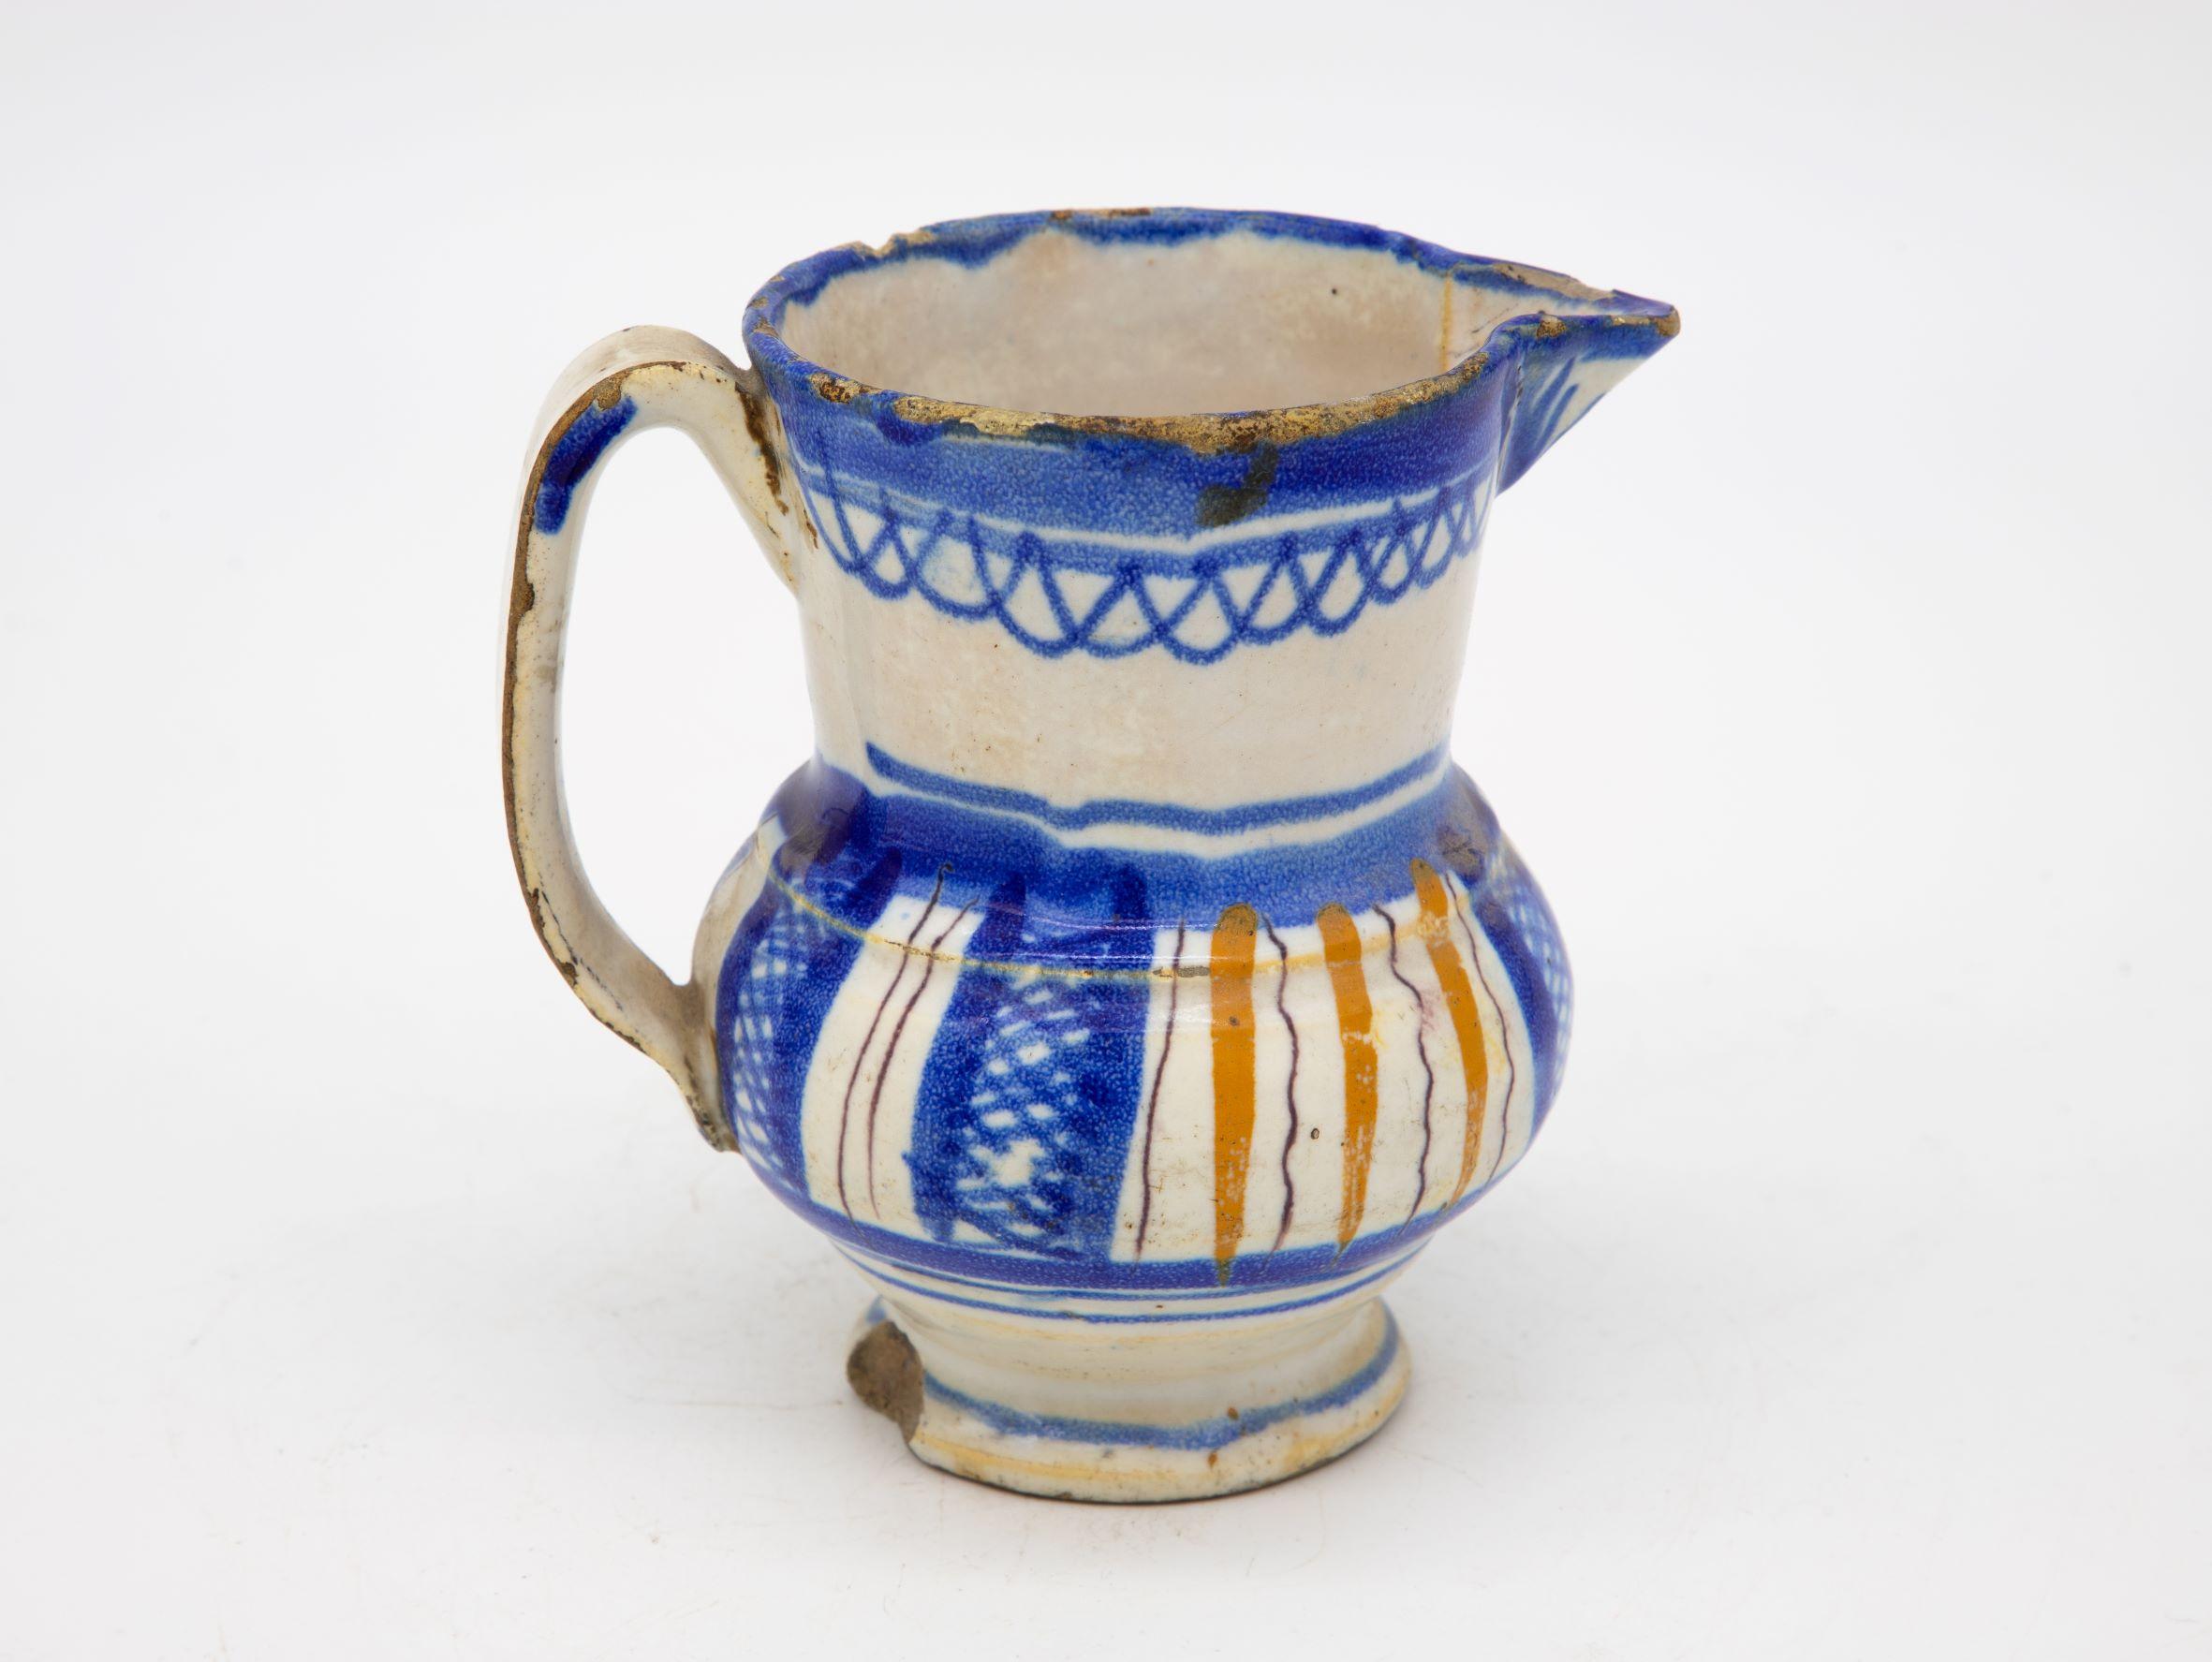 A small white ceramic pitcher or jug with blue and yellow stripe and decoration. Minor loss chips in the base and top. This petire pitcher is of unknown origin, but possibly Spanish. Late 19th century.